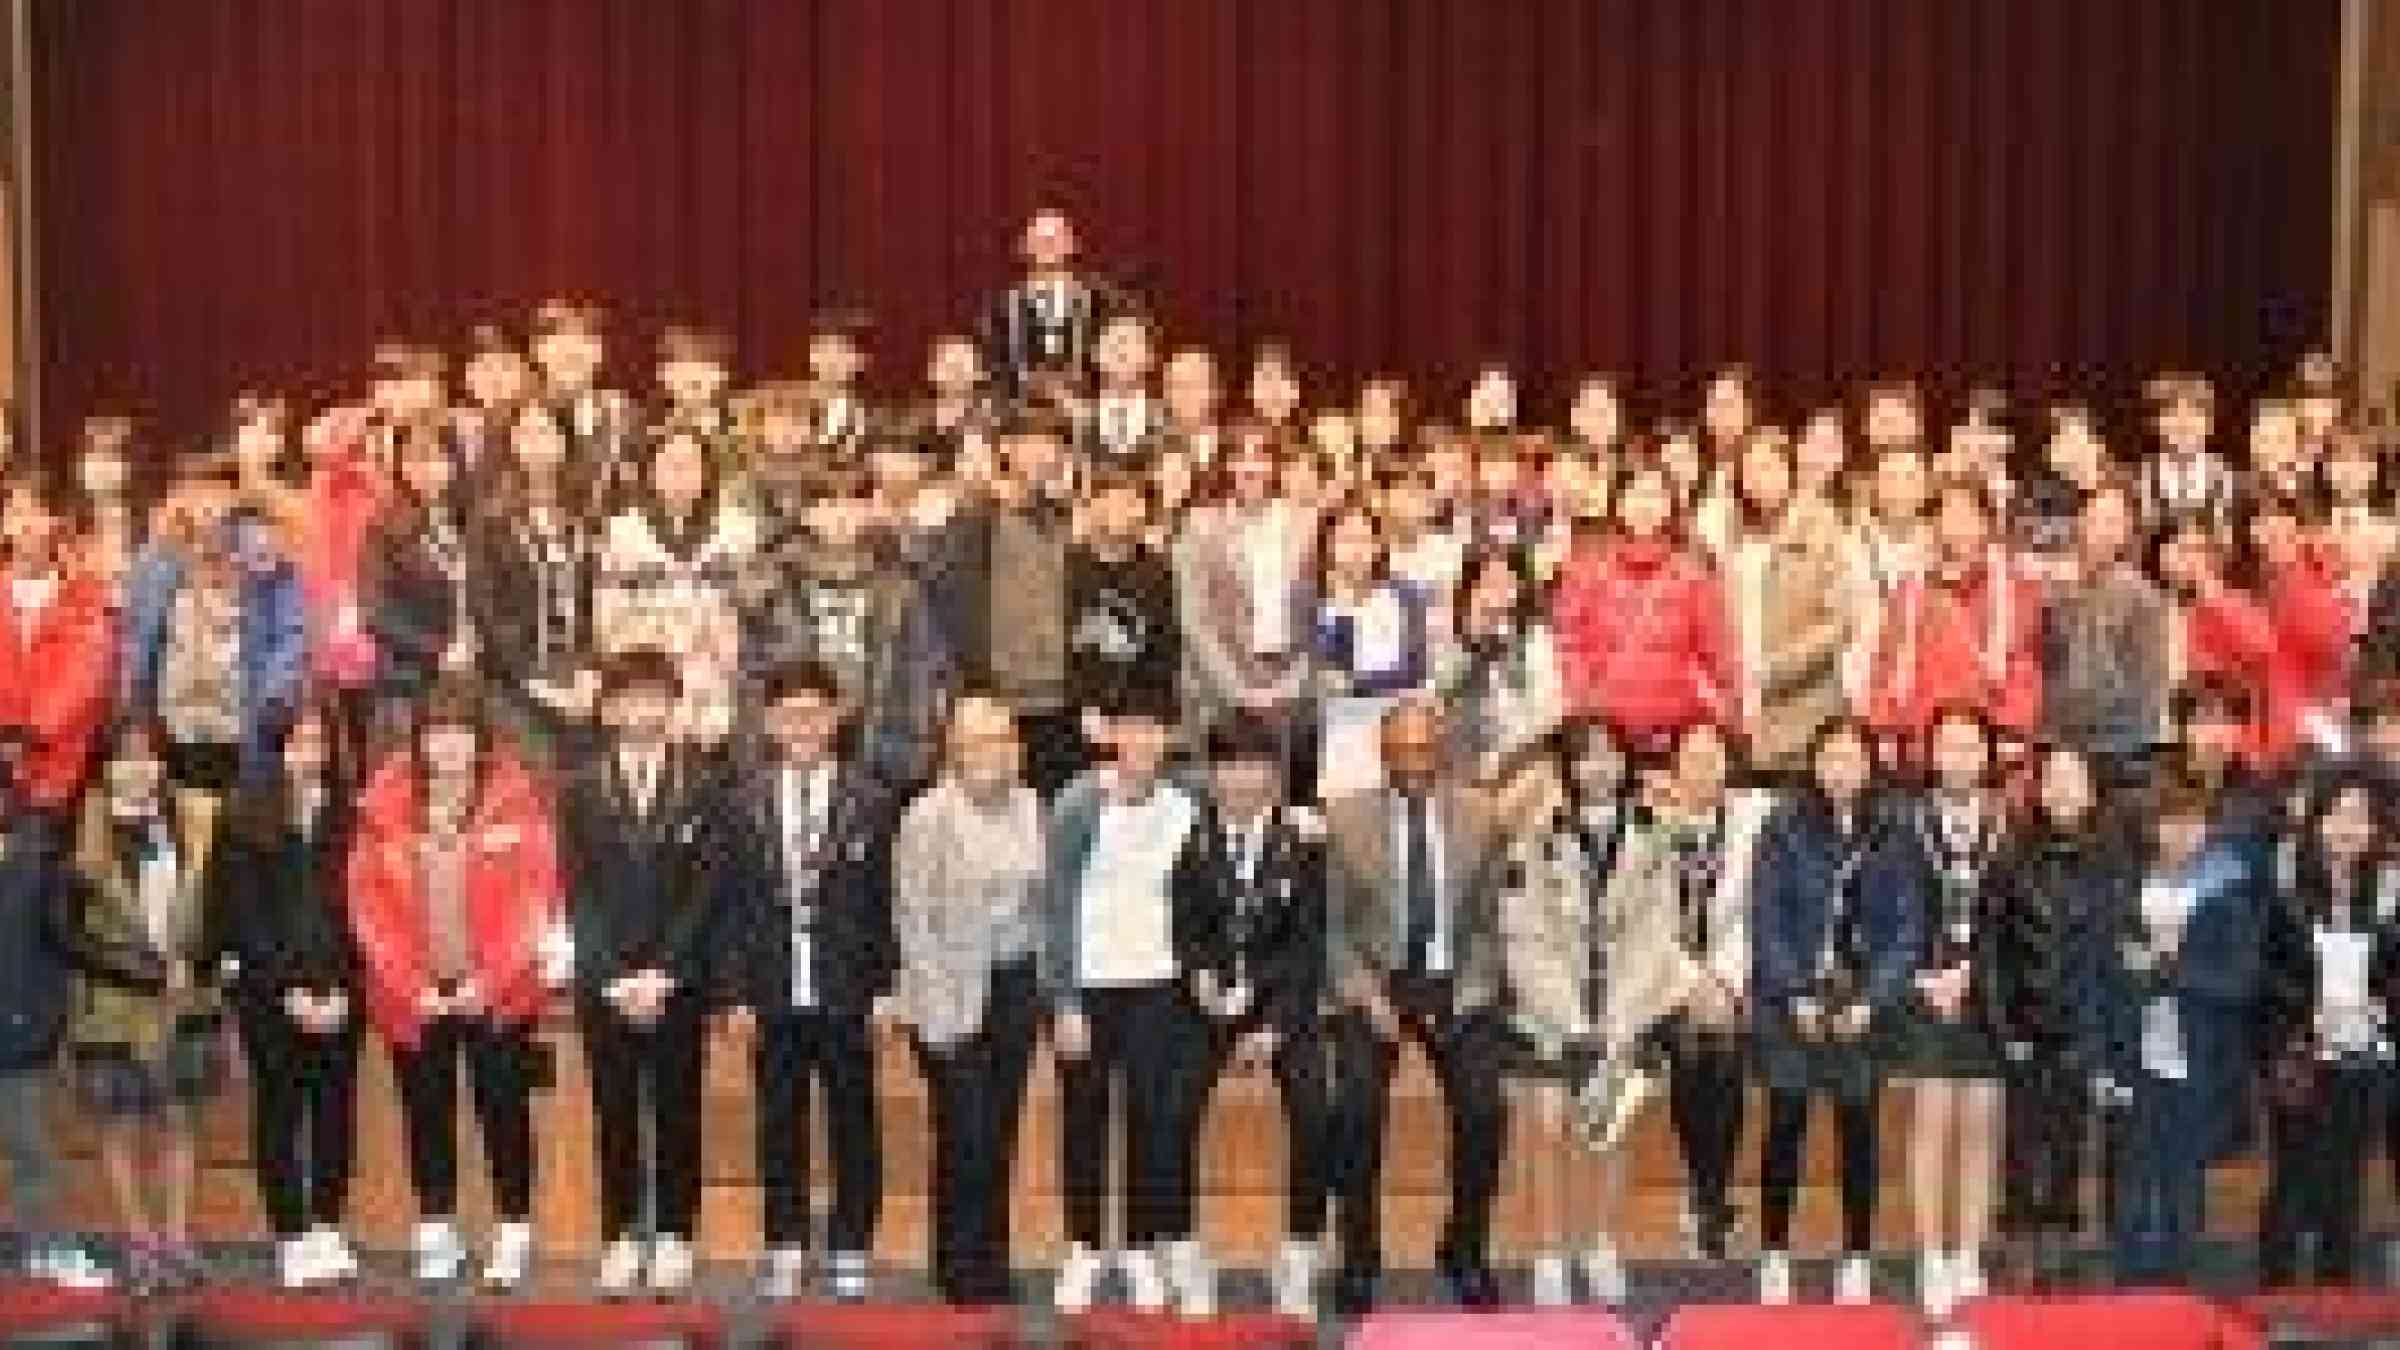 Children and youth who met recently with UNISDR to discuss the Sendai Framework in Incheon, Republic of Korea